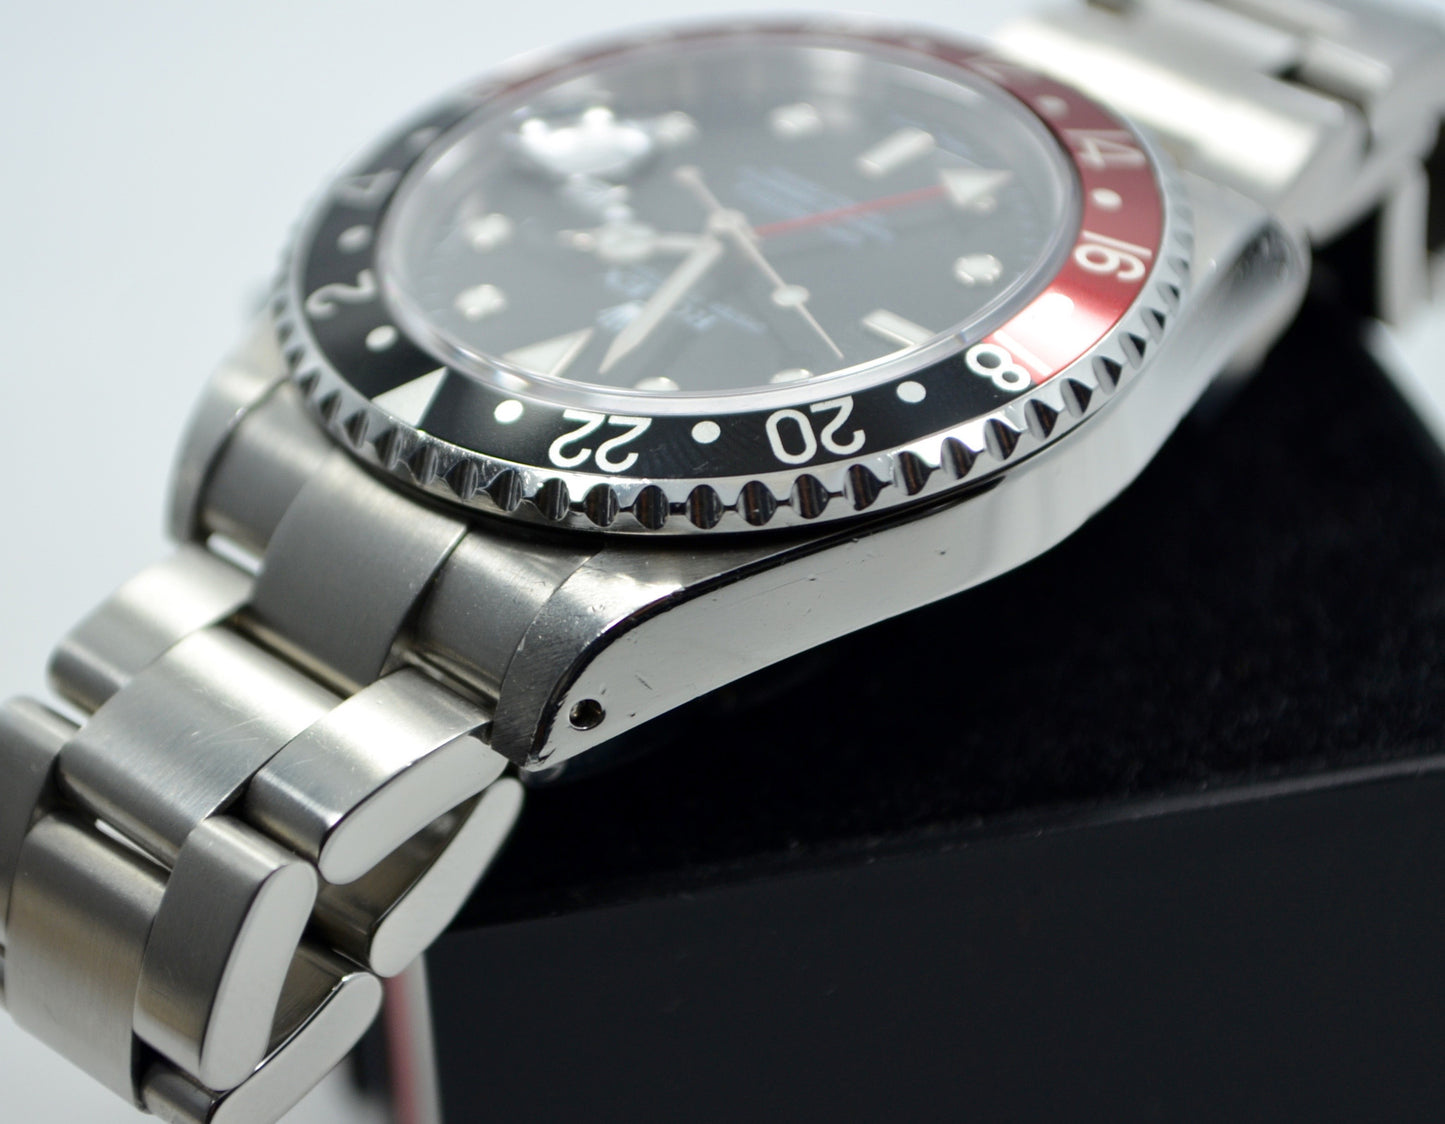 Rolex GMT Master II 16710 Stainless Steel Coke Automatic Wristwatch "Y" Series - Hashtag Watch Company